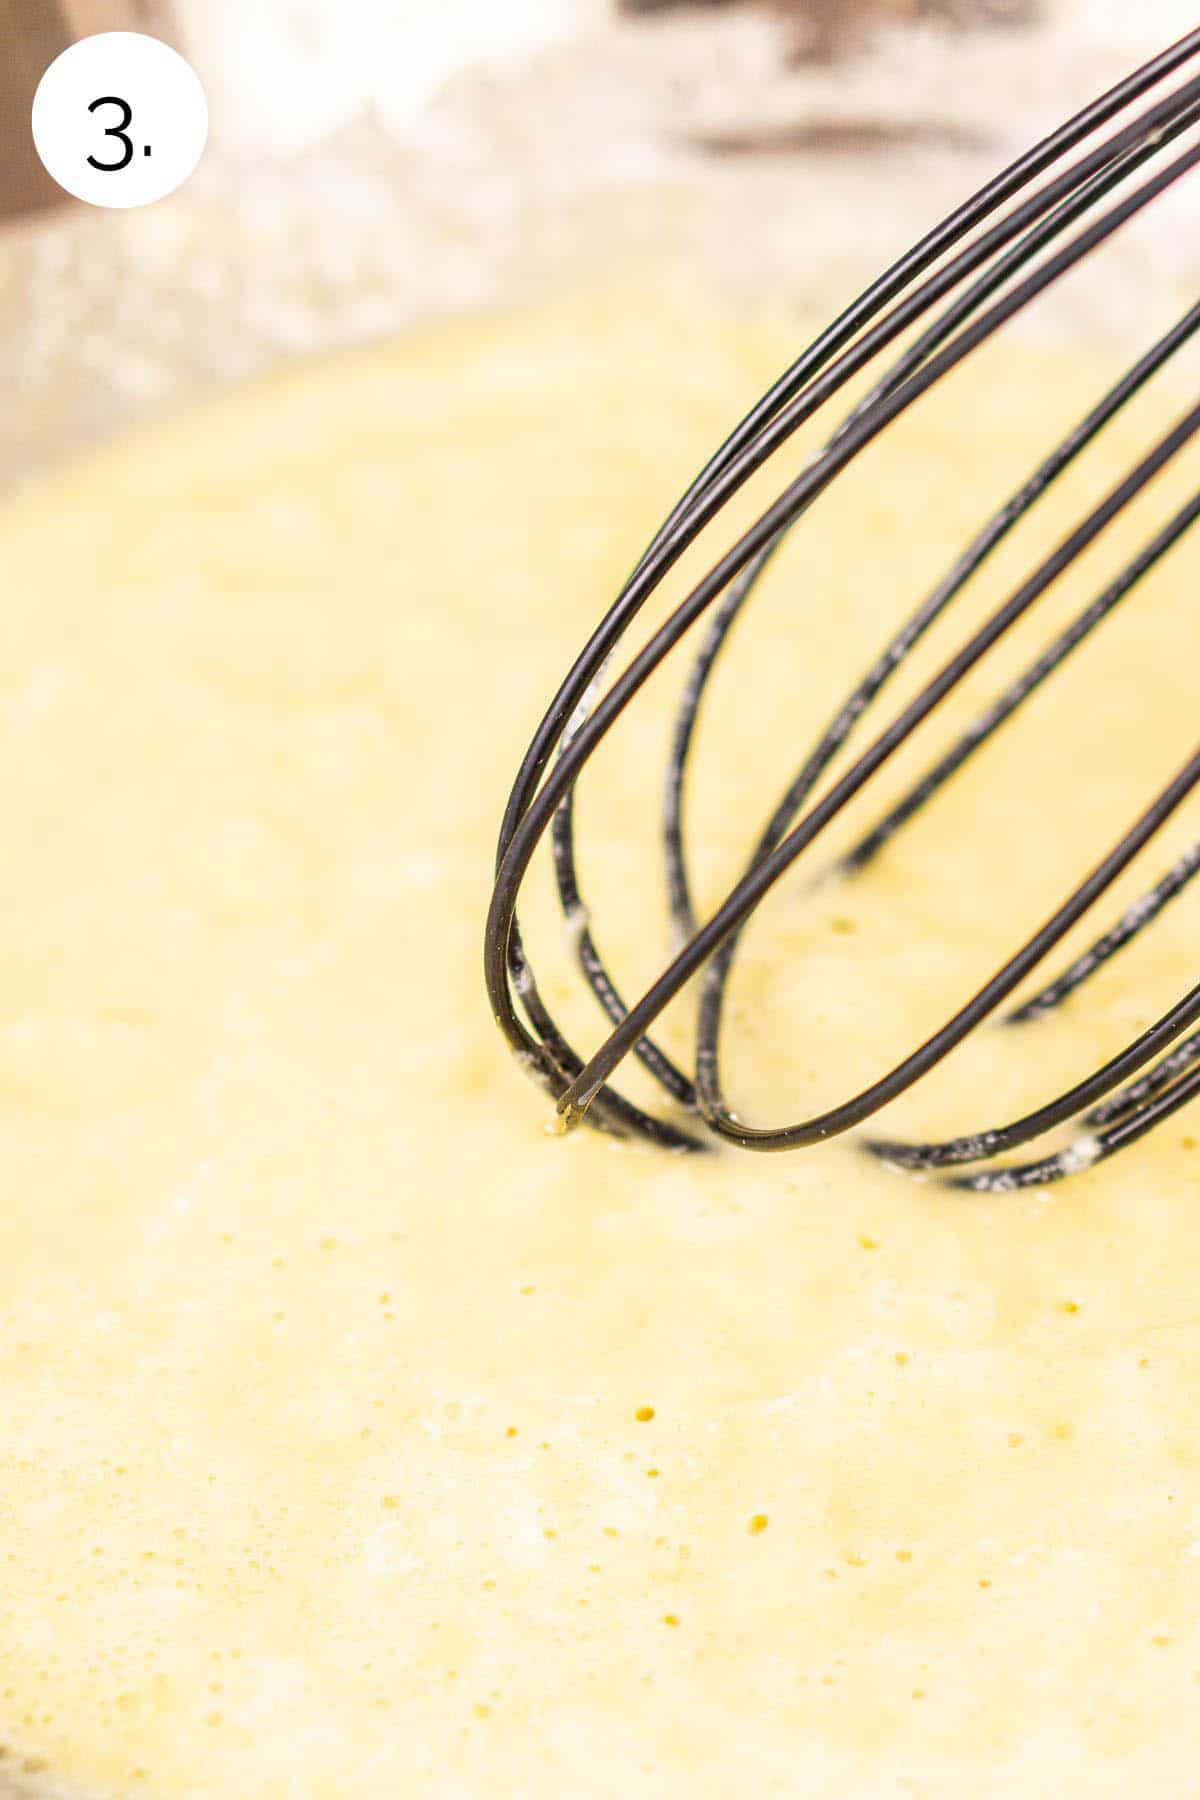 Whisking the flour into the butter and garlic mixture on the stove until it becomes one cohesive mixture.